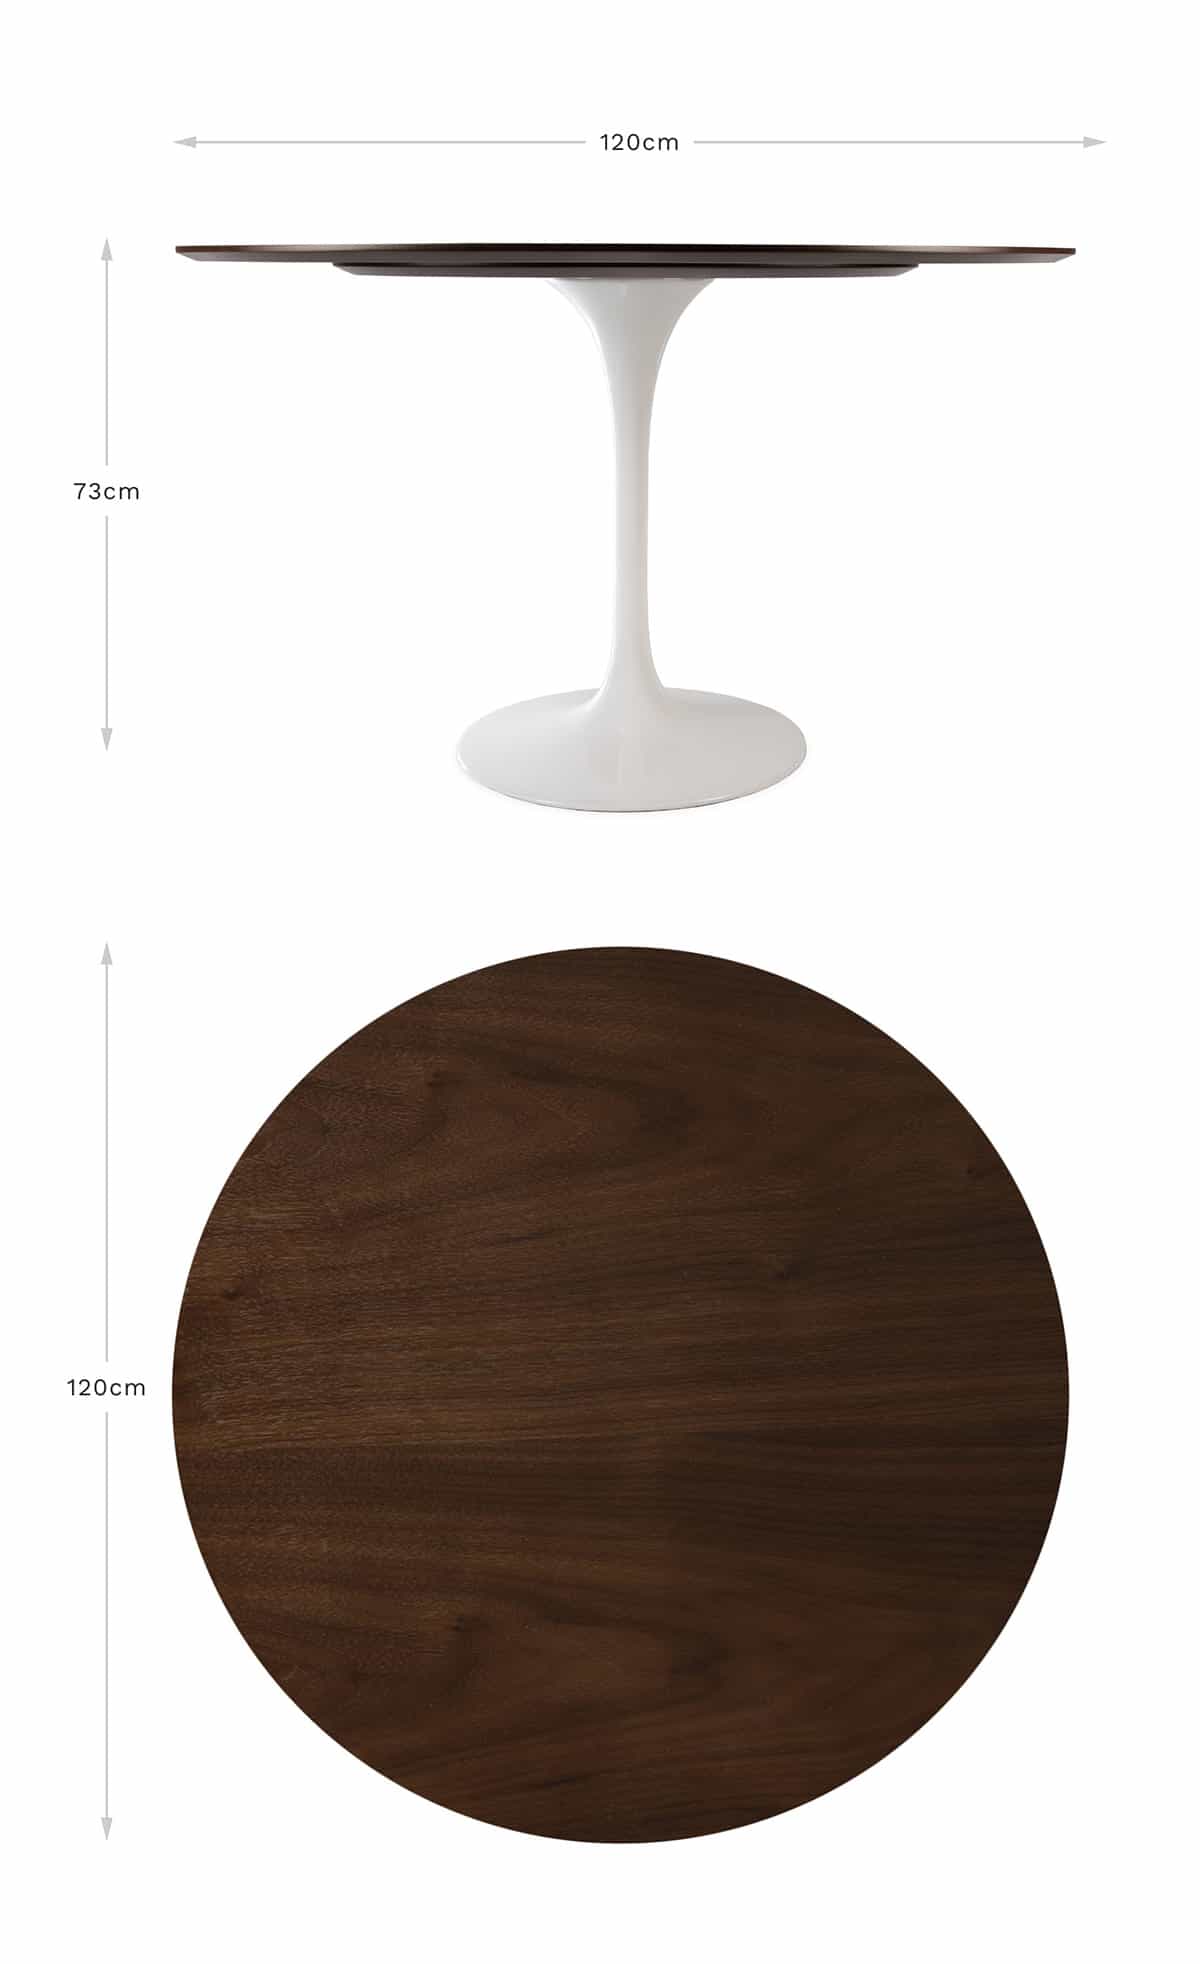 Adjusted for mobile & tablet, this image has a top down & straight on view of the 120 cm Saarinen Tulip Table providing visual dimensions for the product